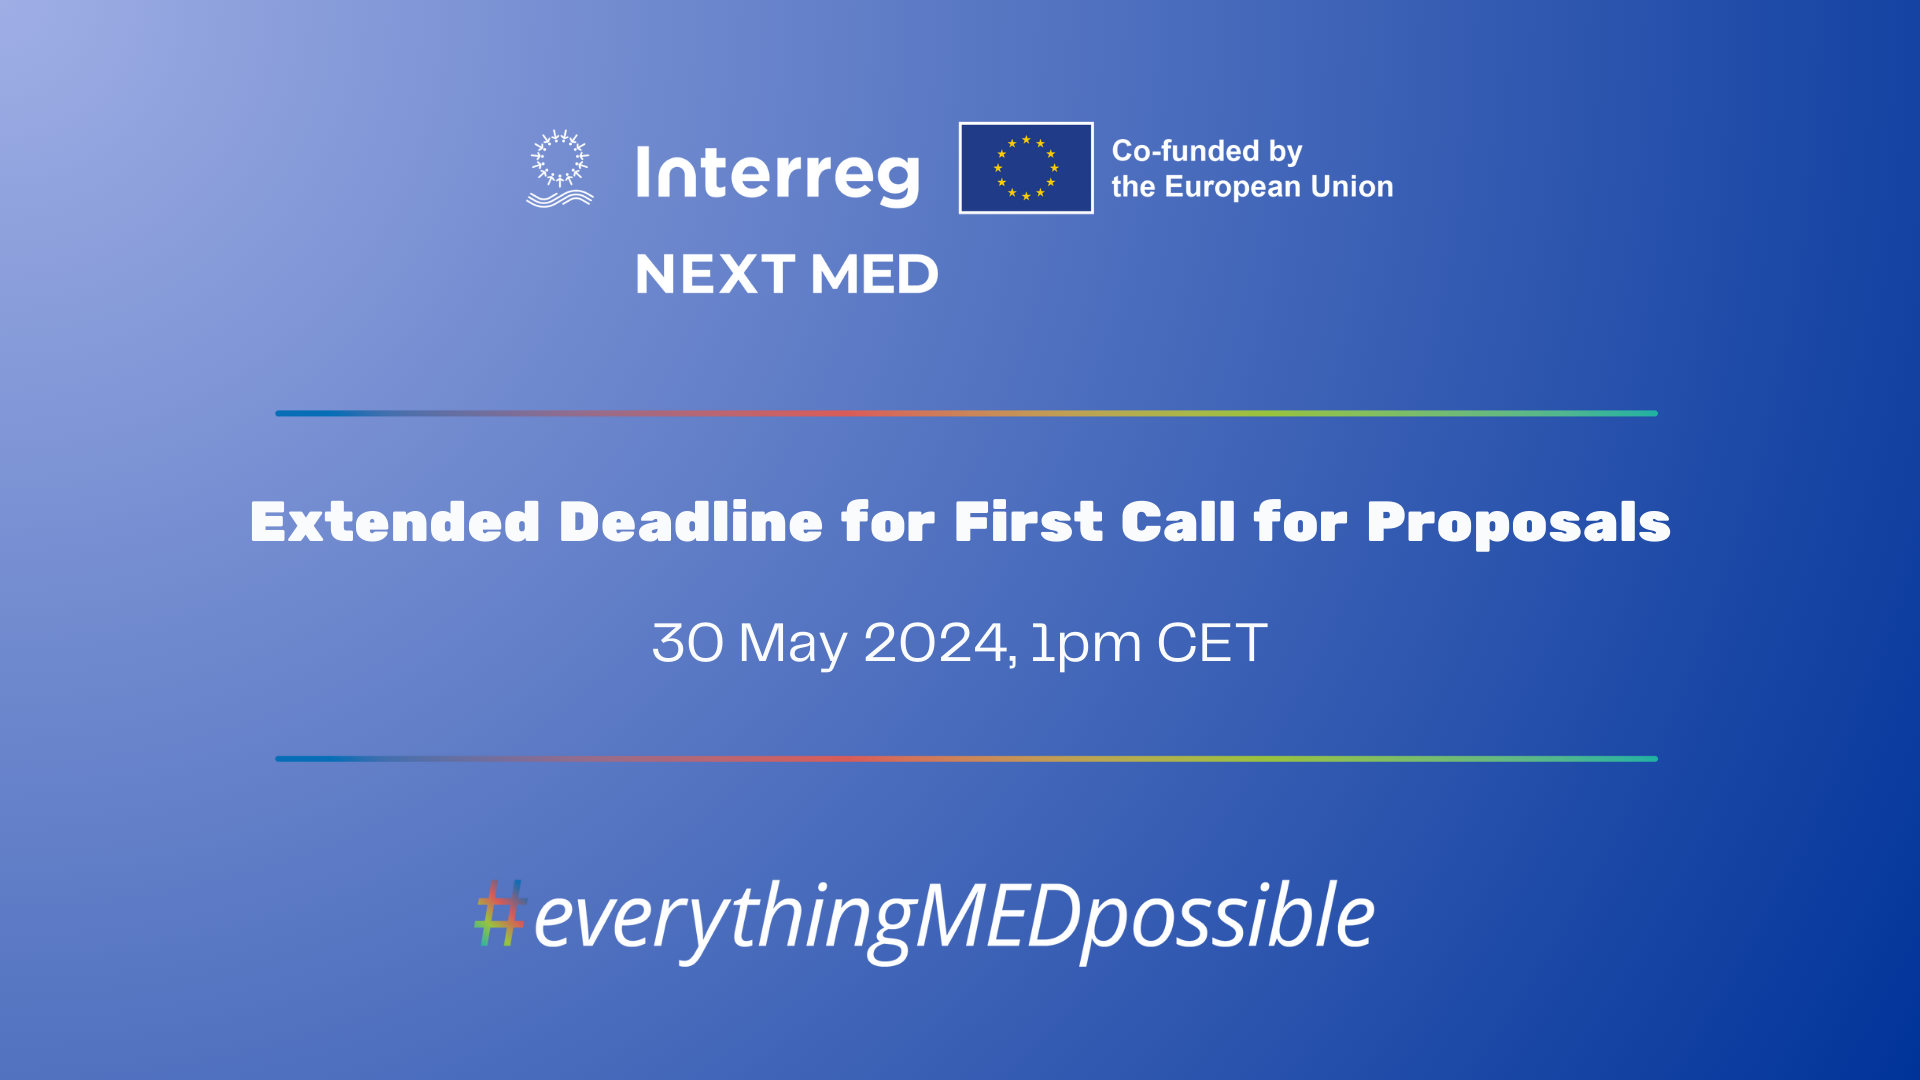 Extended Deadline for the Interreg NEXT MED First Call for Proposals